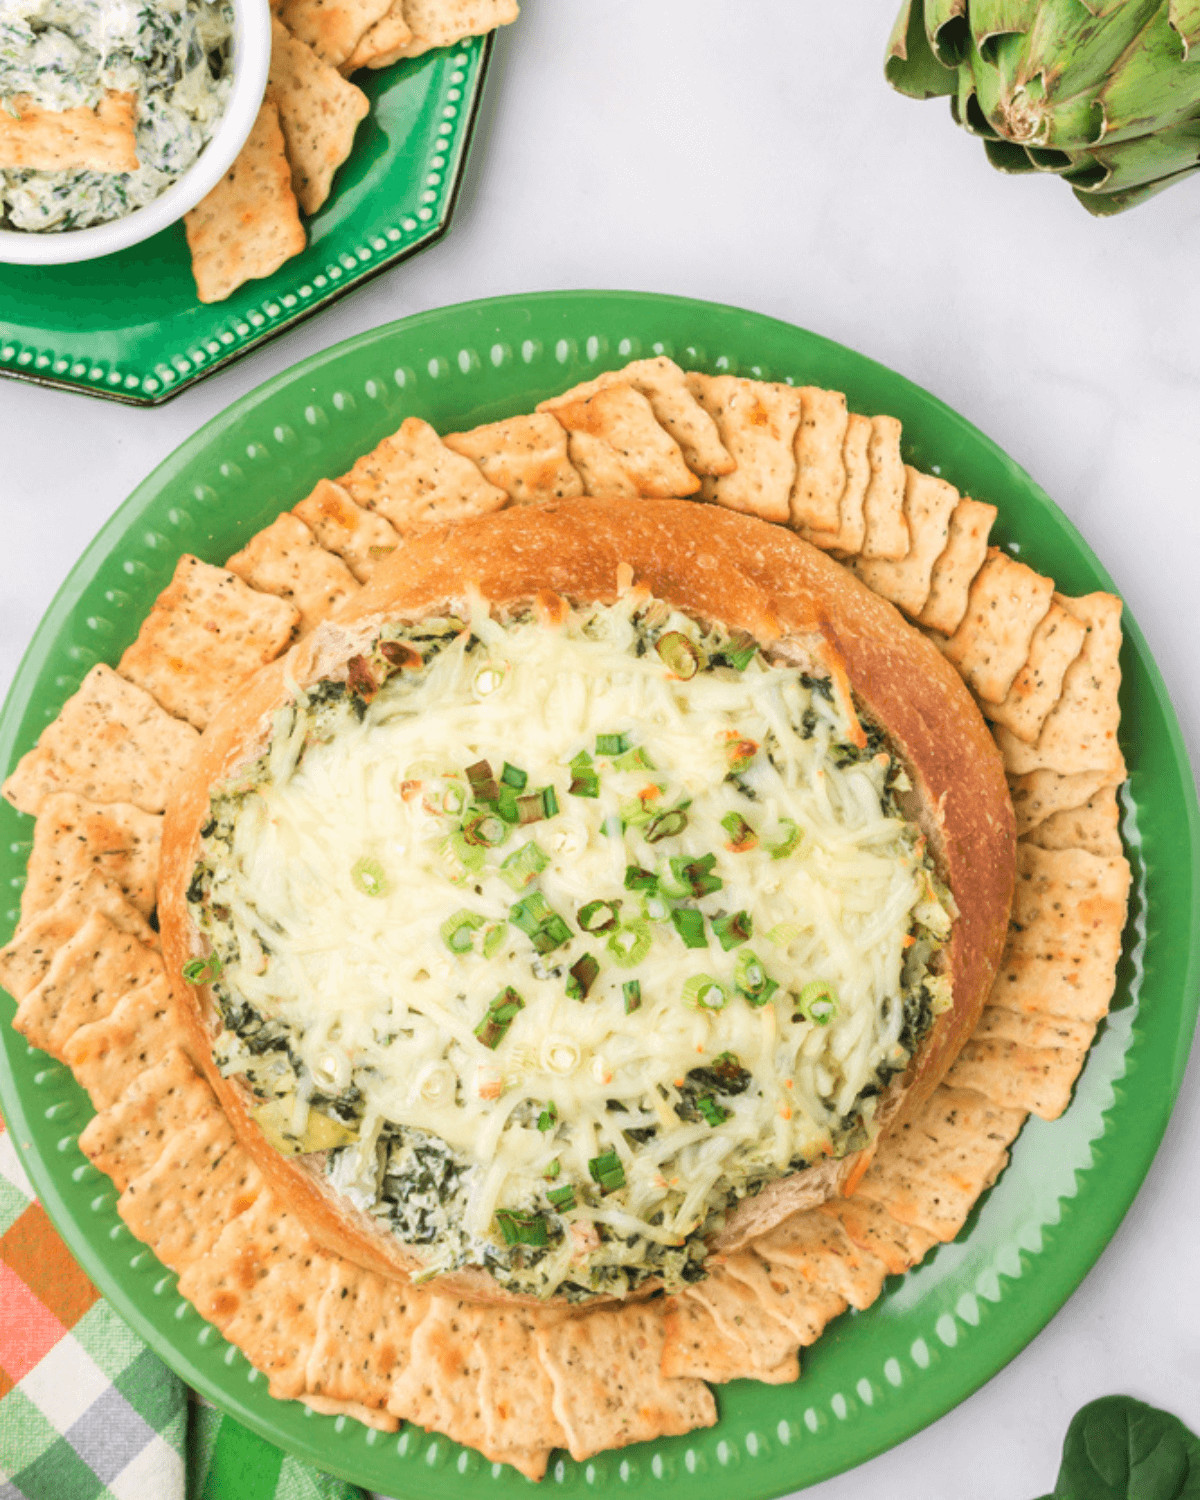 Spinach and Artichoke Dip on a plate with crackers, made without Mayo.